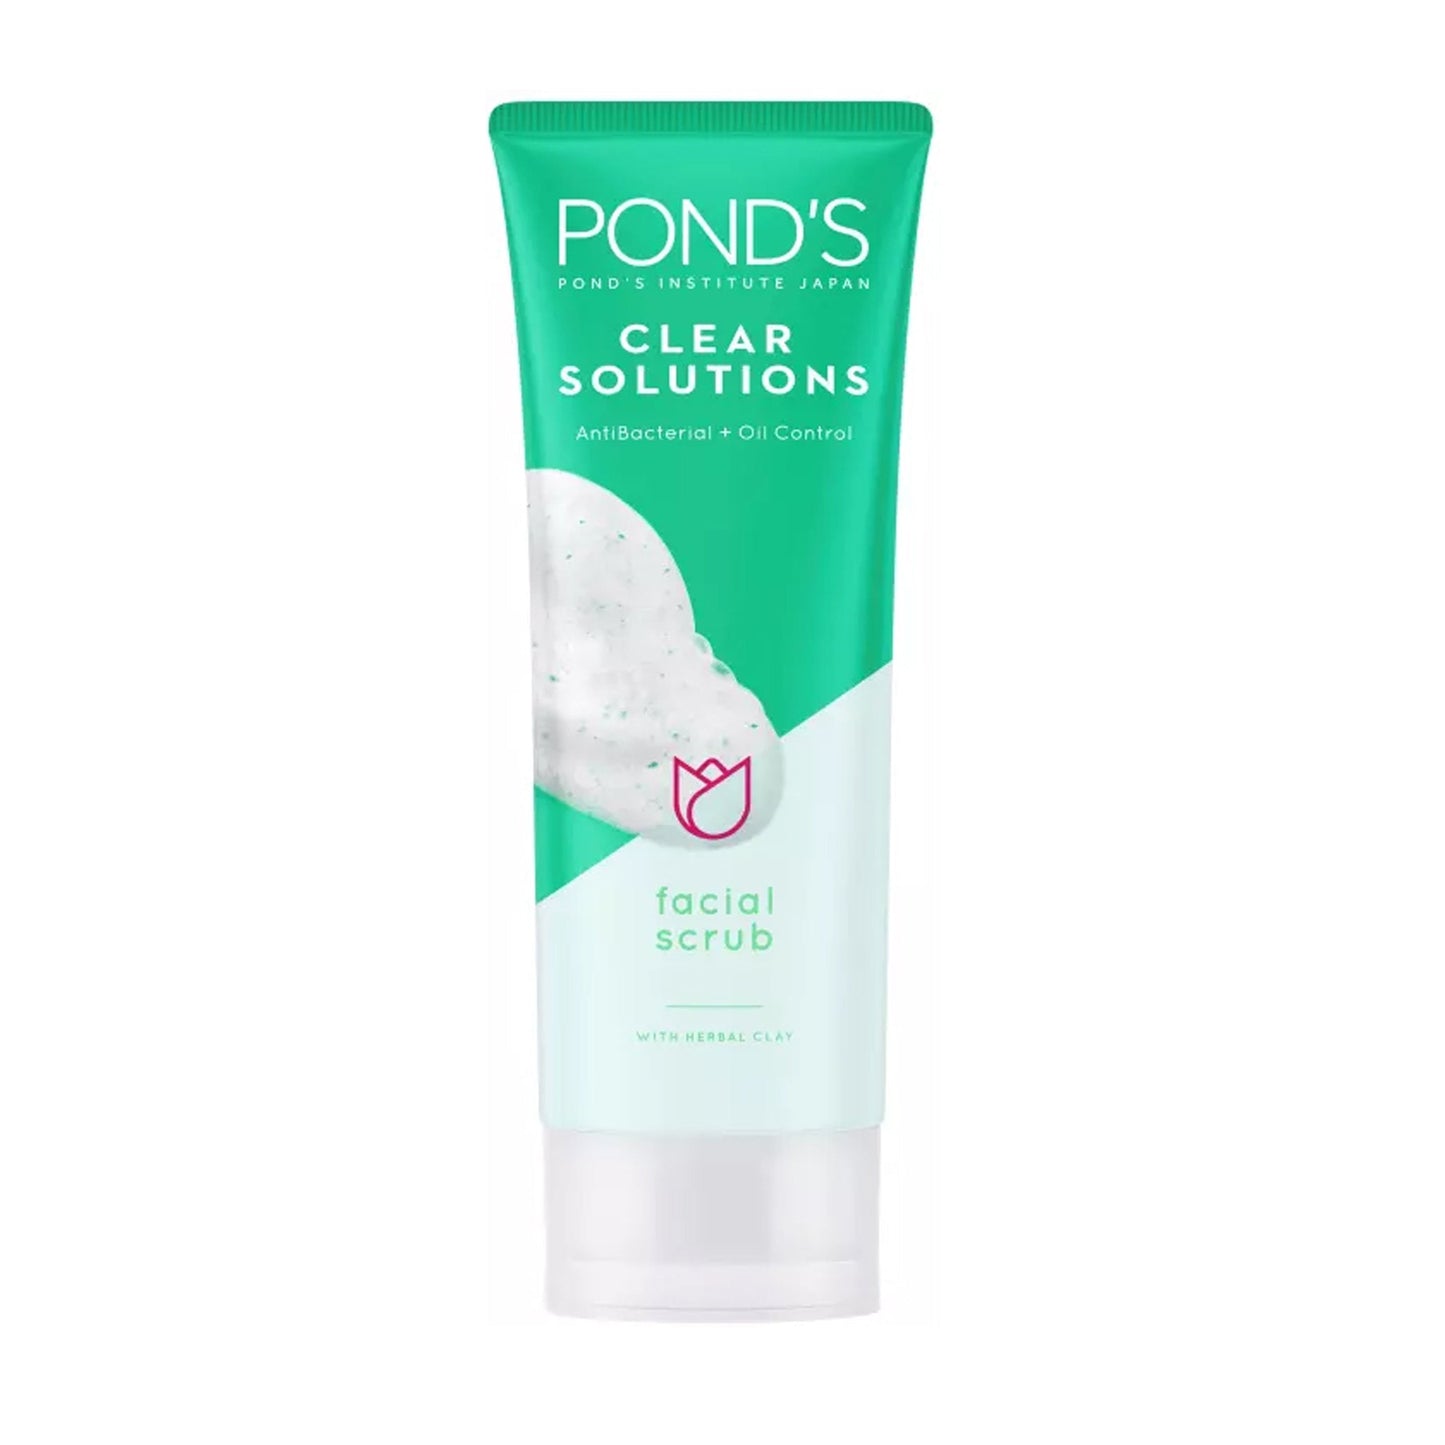 Pond's - Clear Solutions Anti-Bacterial + Oil Control Facial Scrub With Herbal Clay - 100g